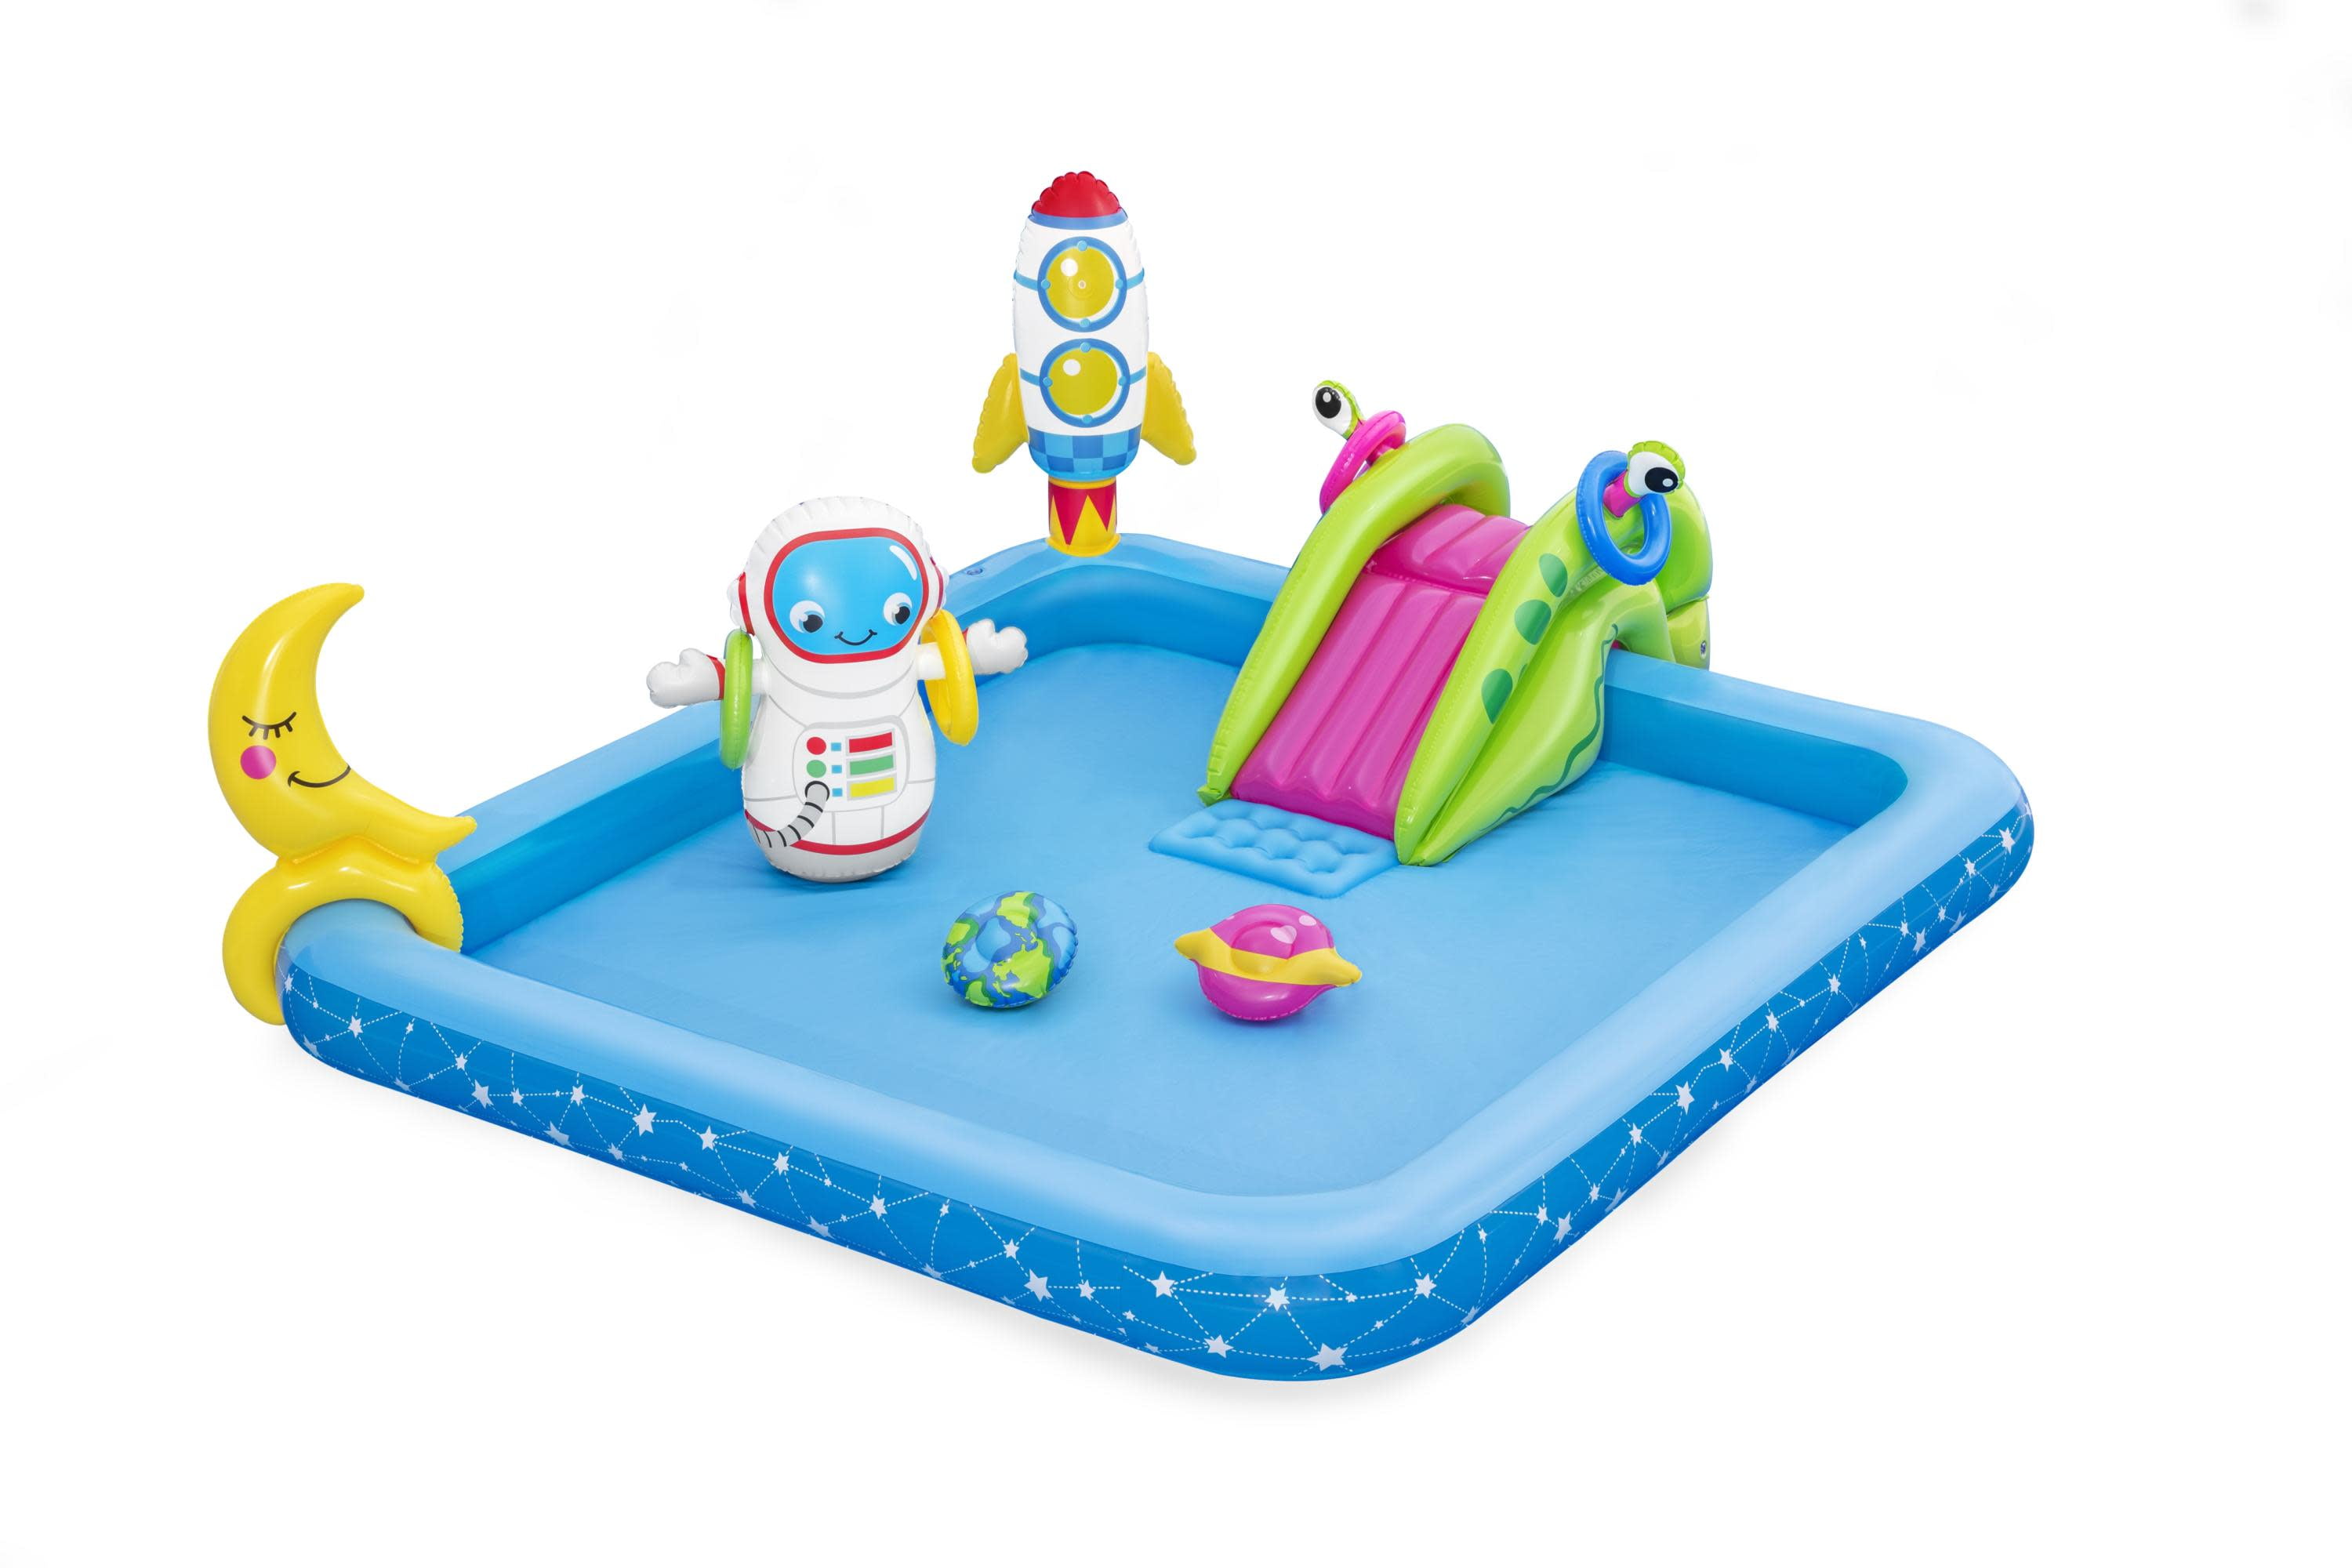 H2OGO! Little Astronaut Inflatable Kids Water Play Pool Center with Slide -  Walmart.com